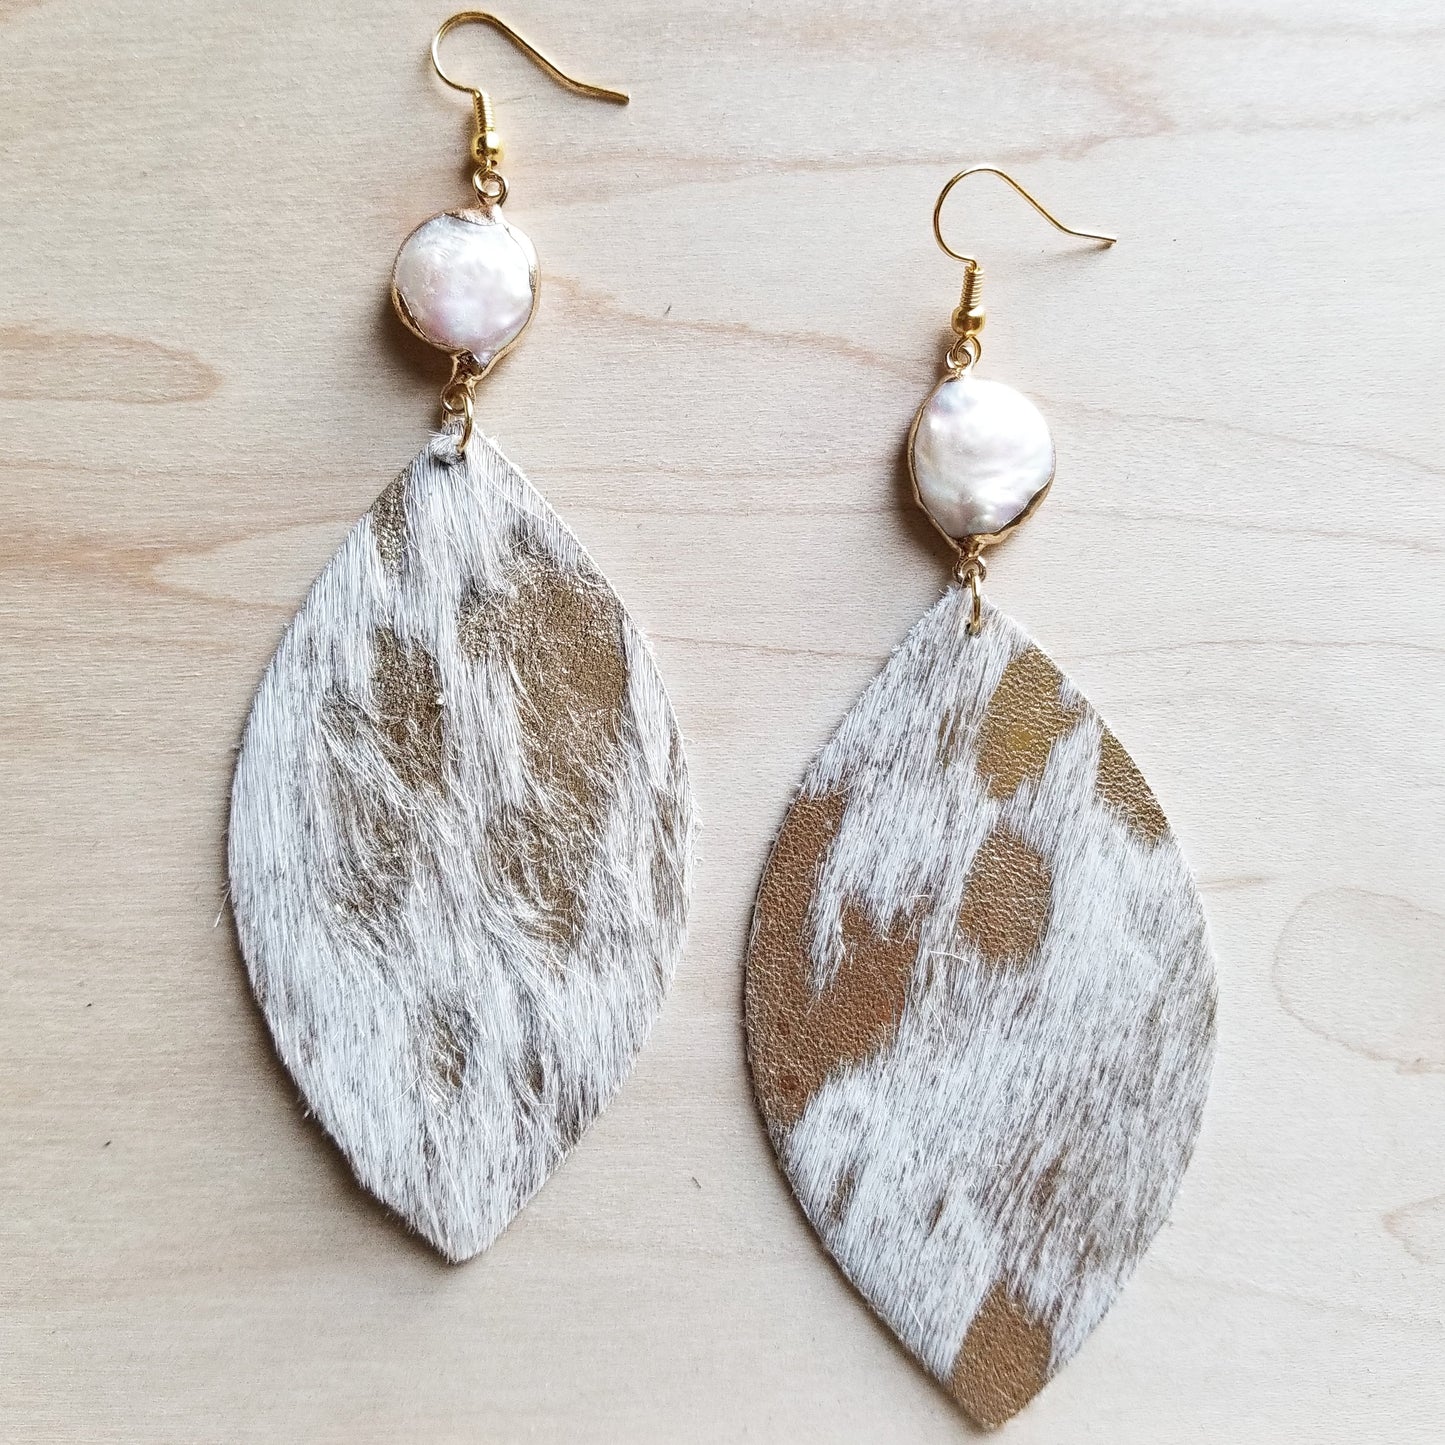 Gold and Cream Hide on Hair Leather Earring with Freshwater Pearl Connector 219w - The Jewelry Junkie